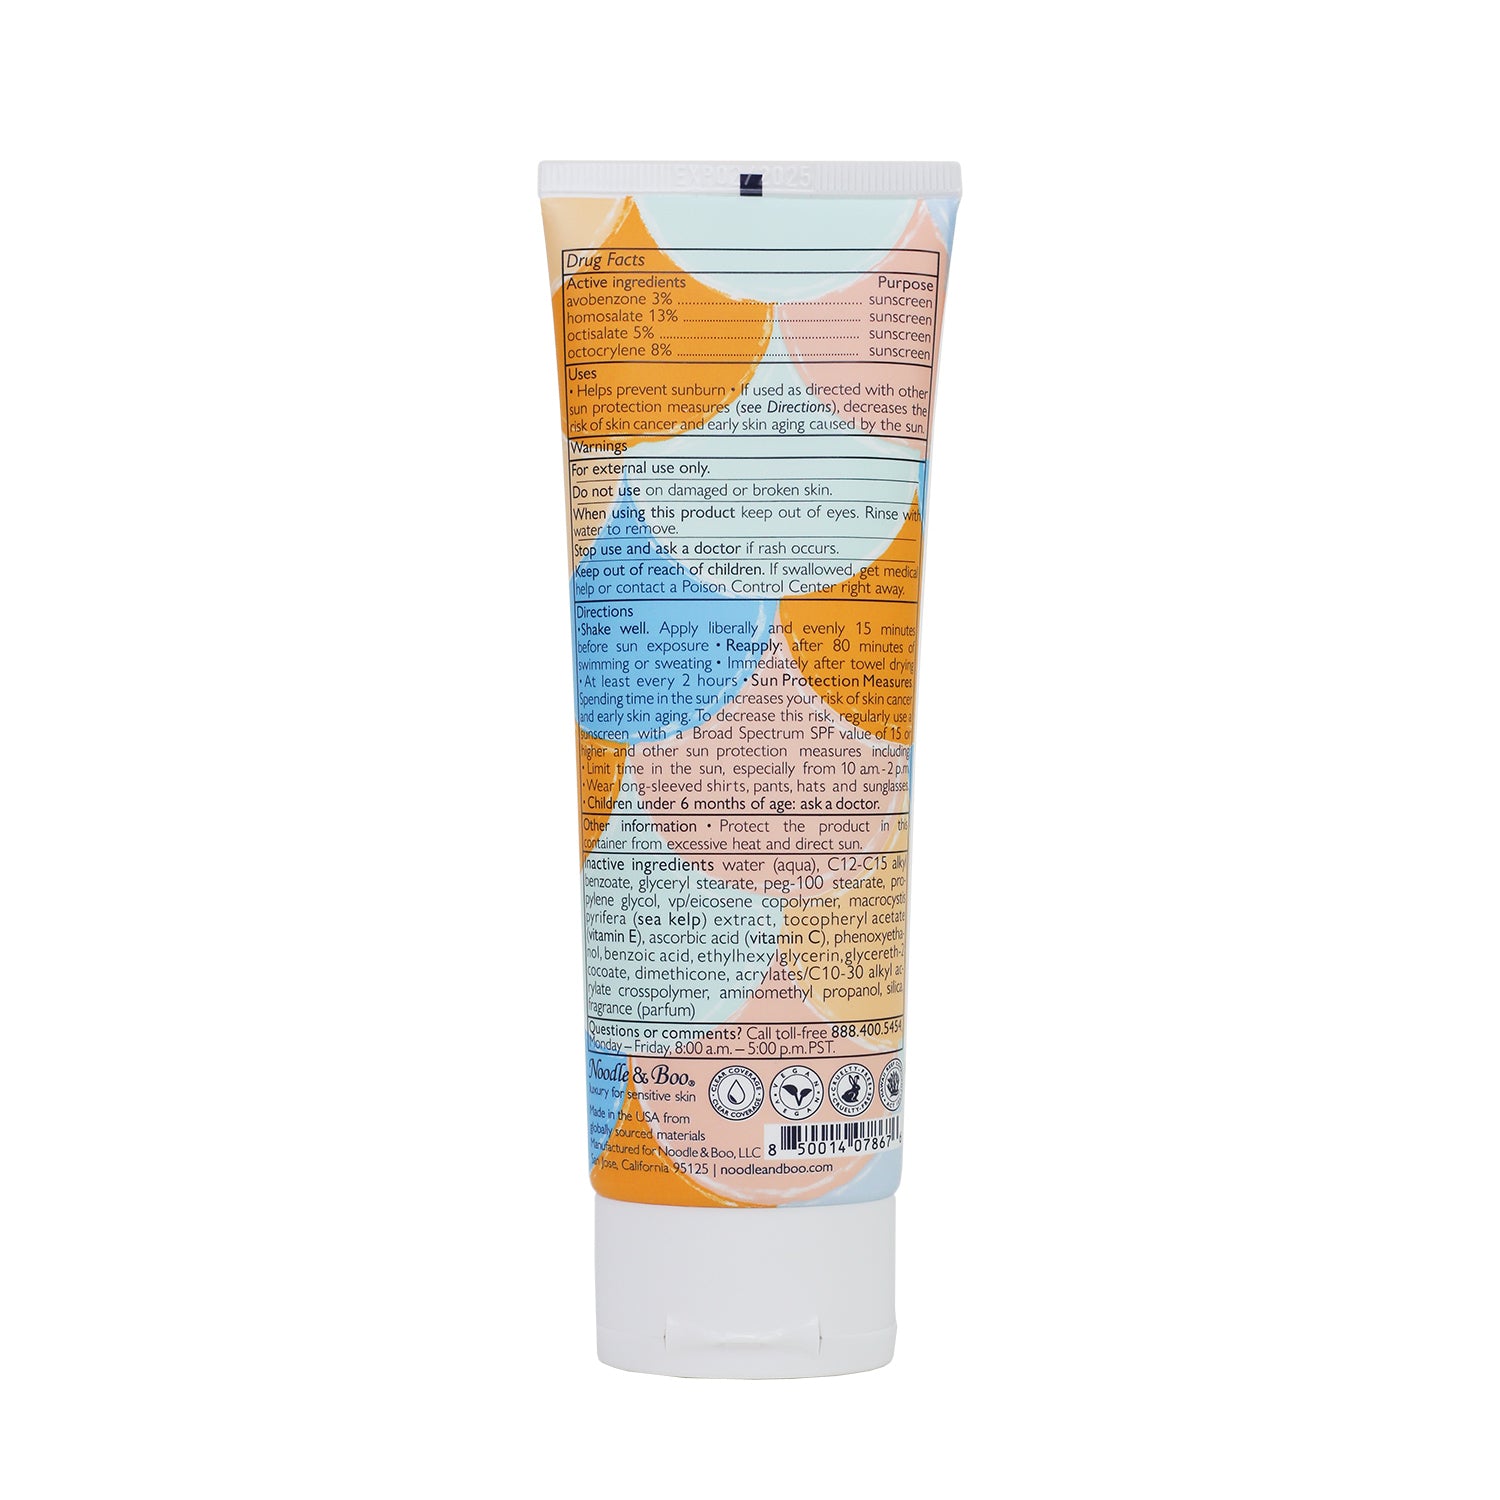 Back side of the Hydrating Sunscreen Lotion SPF 50 